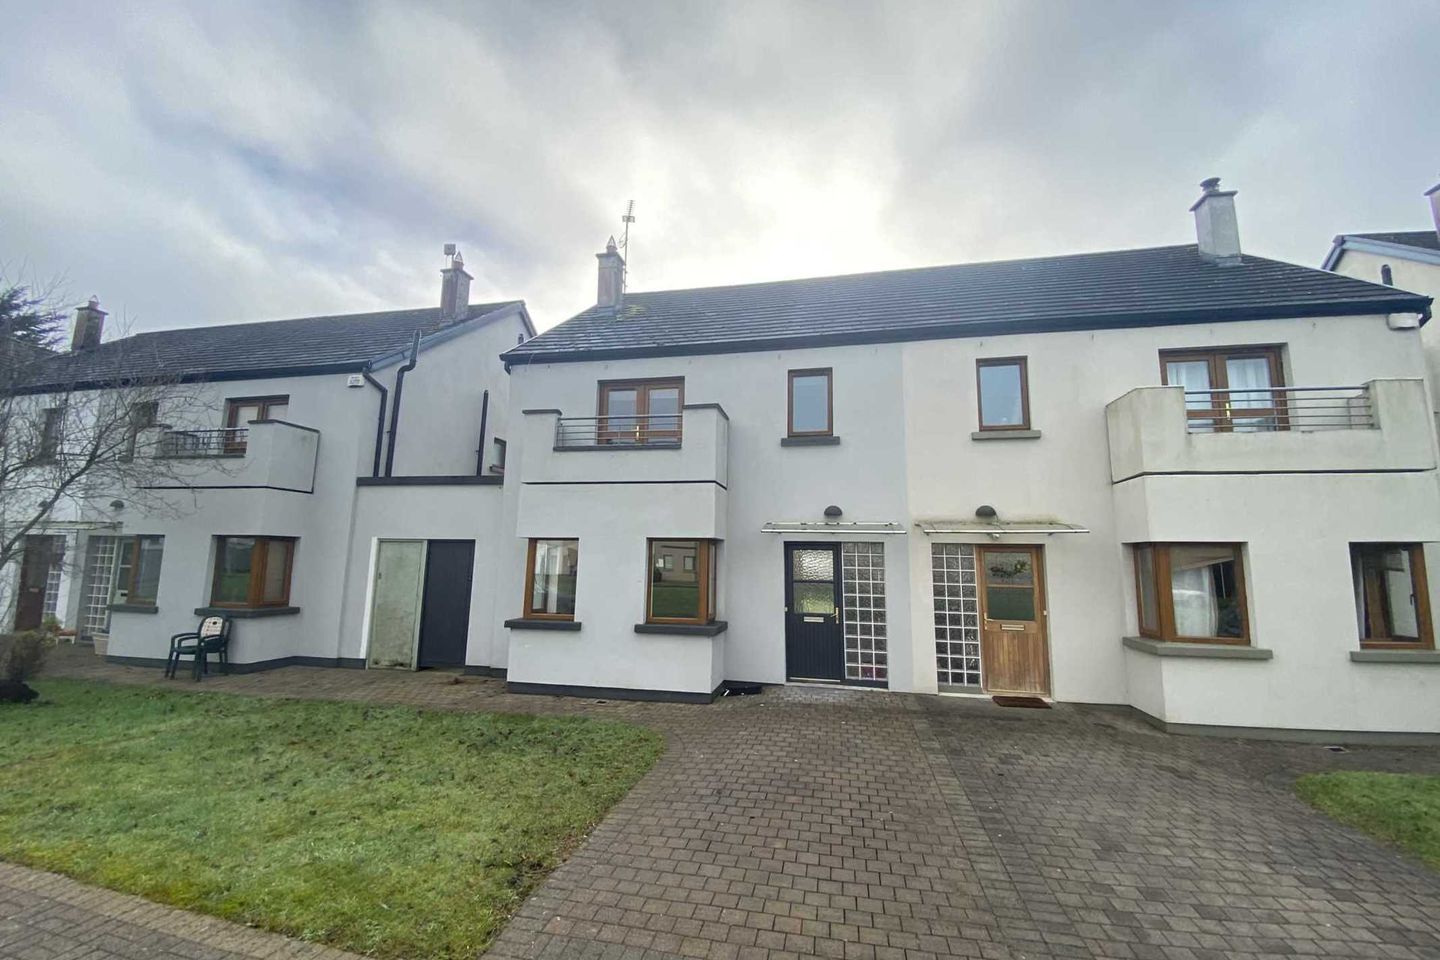 17 Dromsally Woods, Cappamore, Co. Limerick, V94WC9W